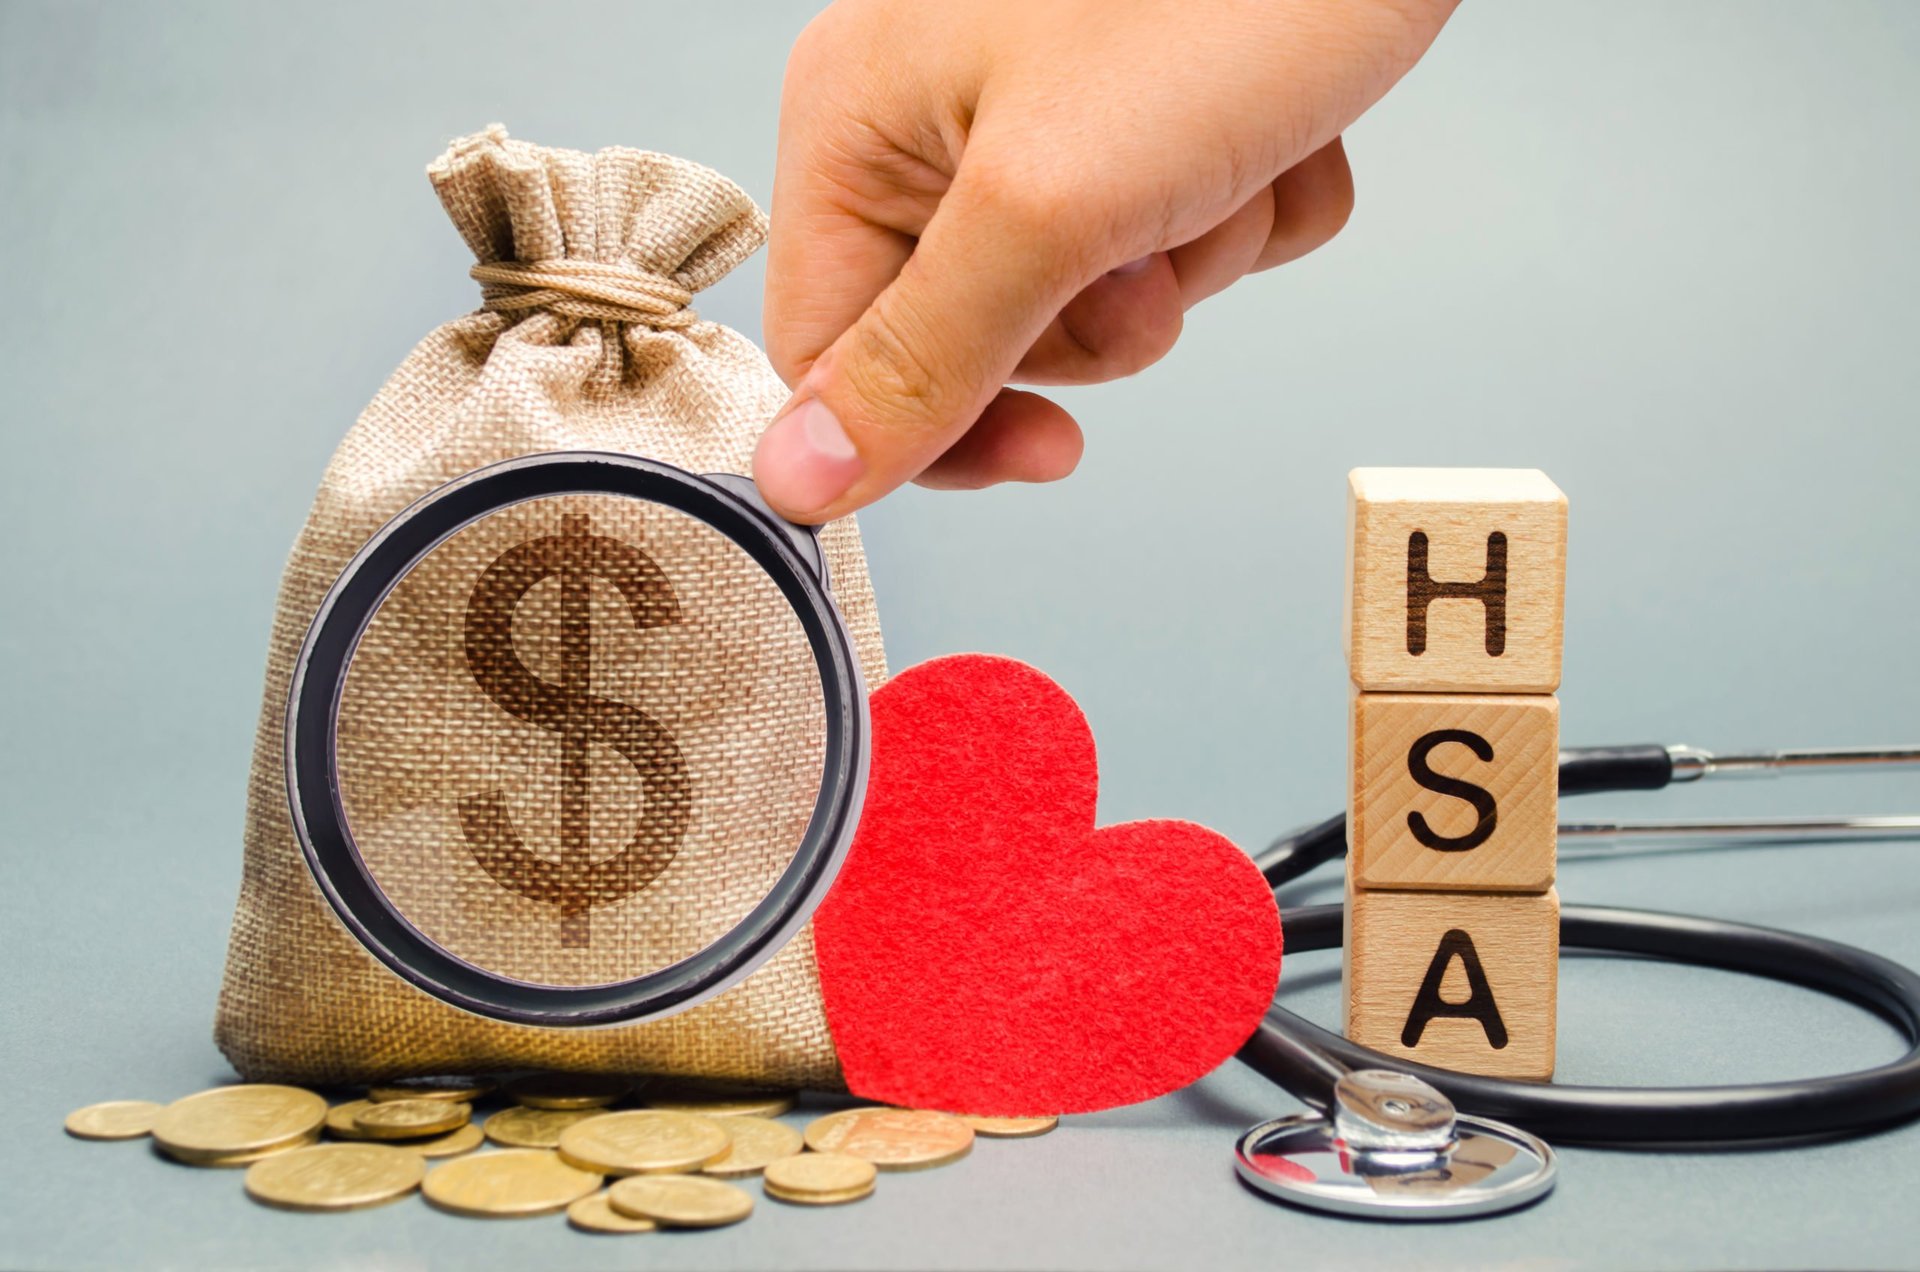 17 Reasons to Open a Health Savings Account